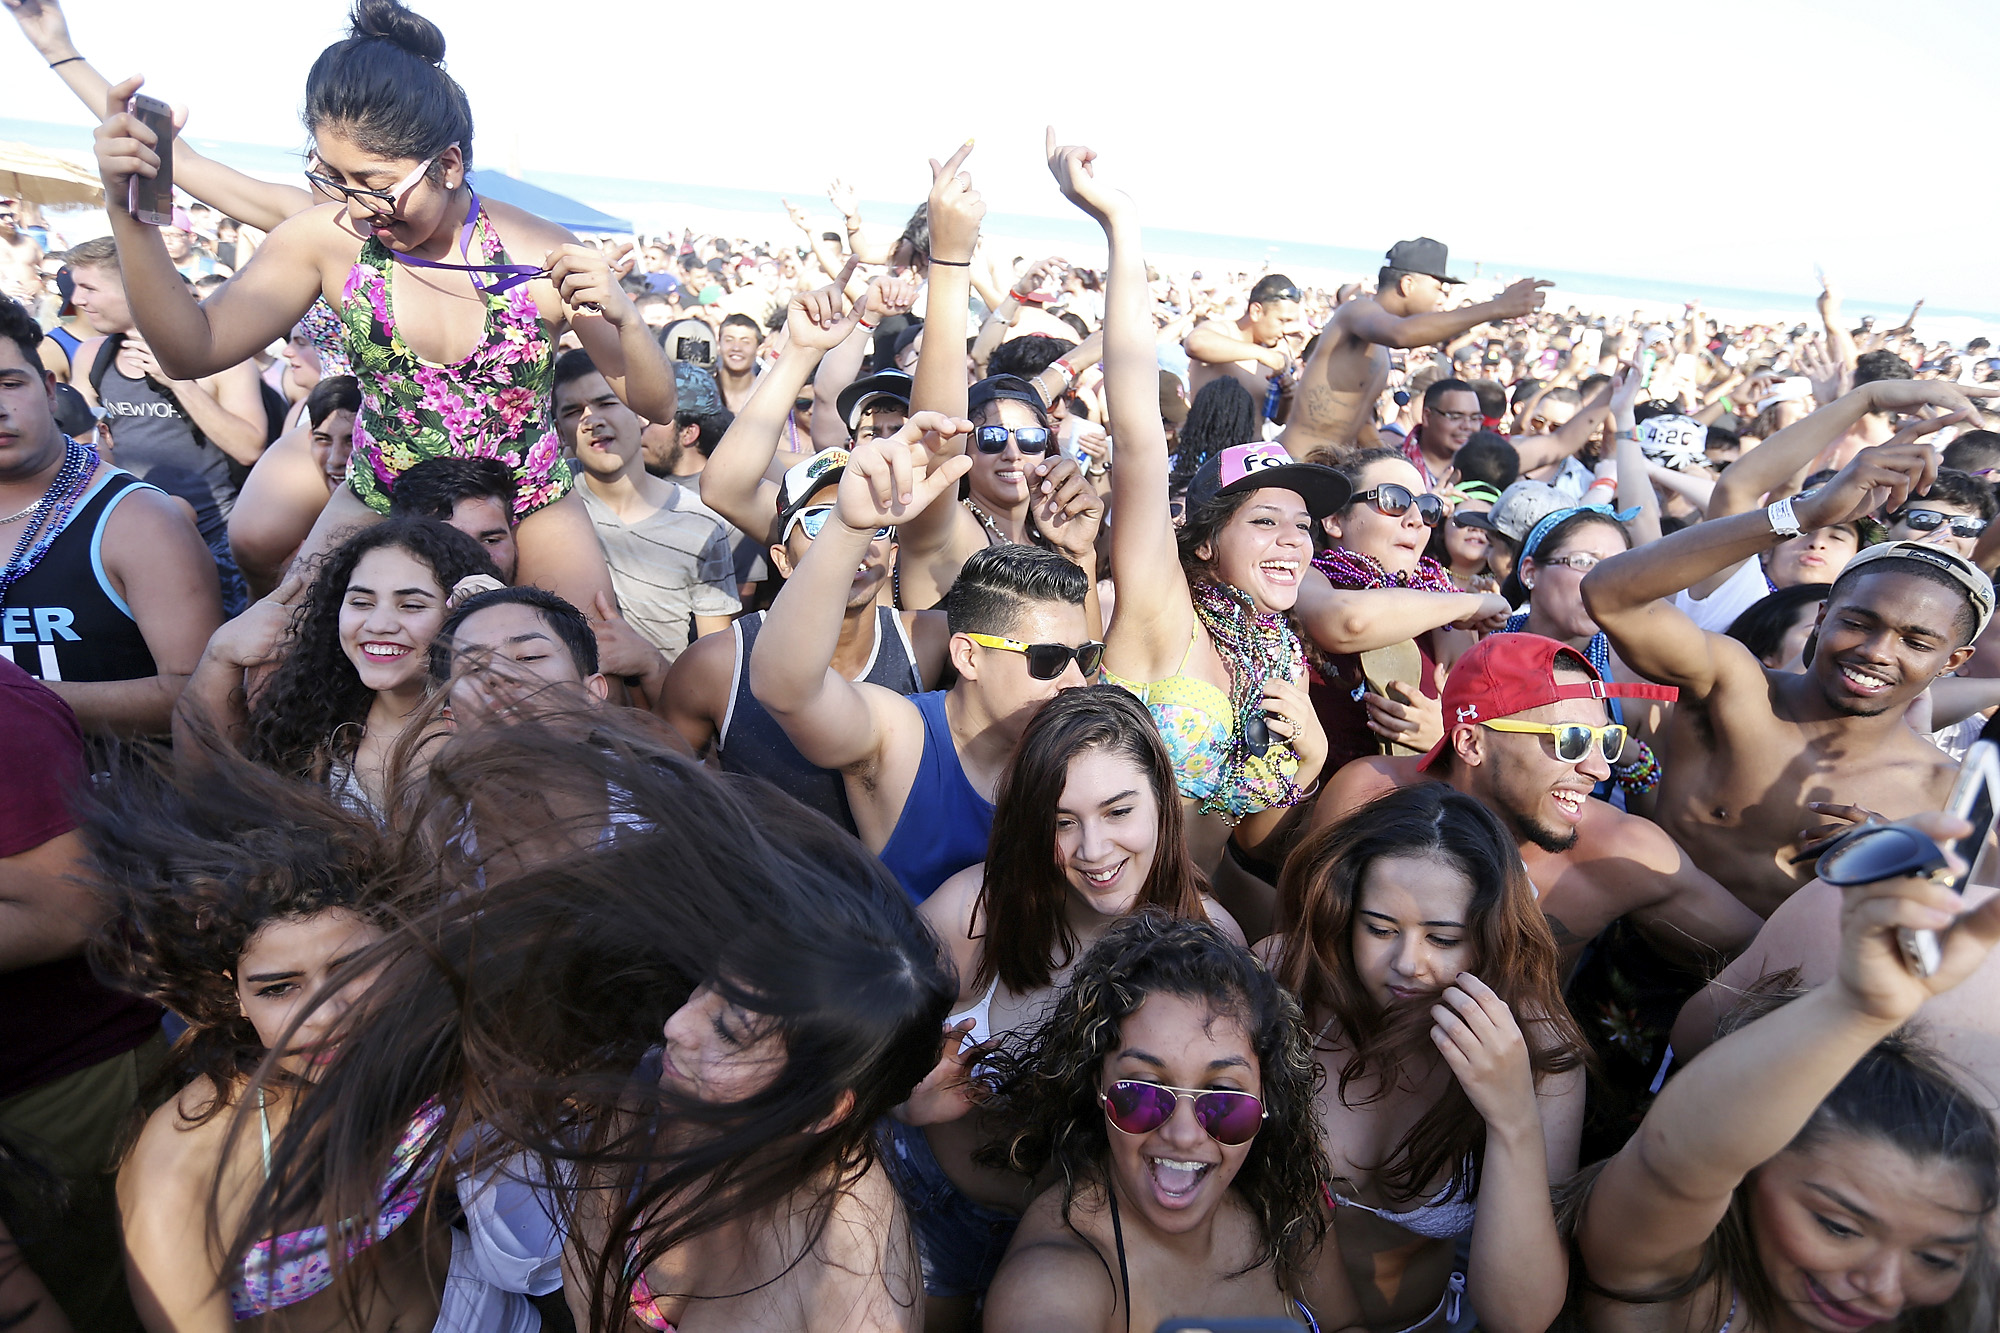 South Padre keeps on drawing Spring Breakers, despite past woes